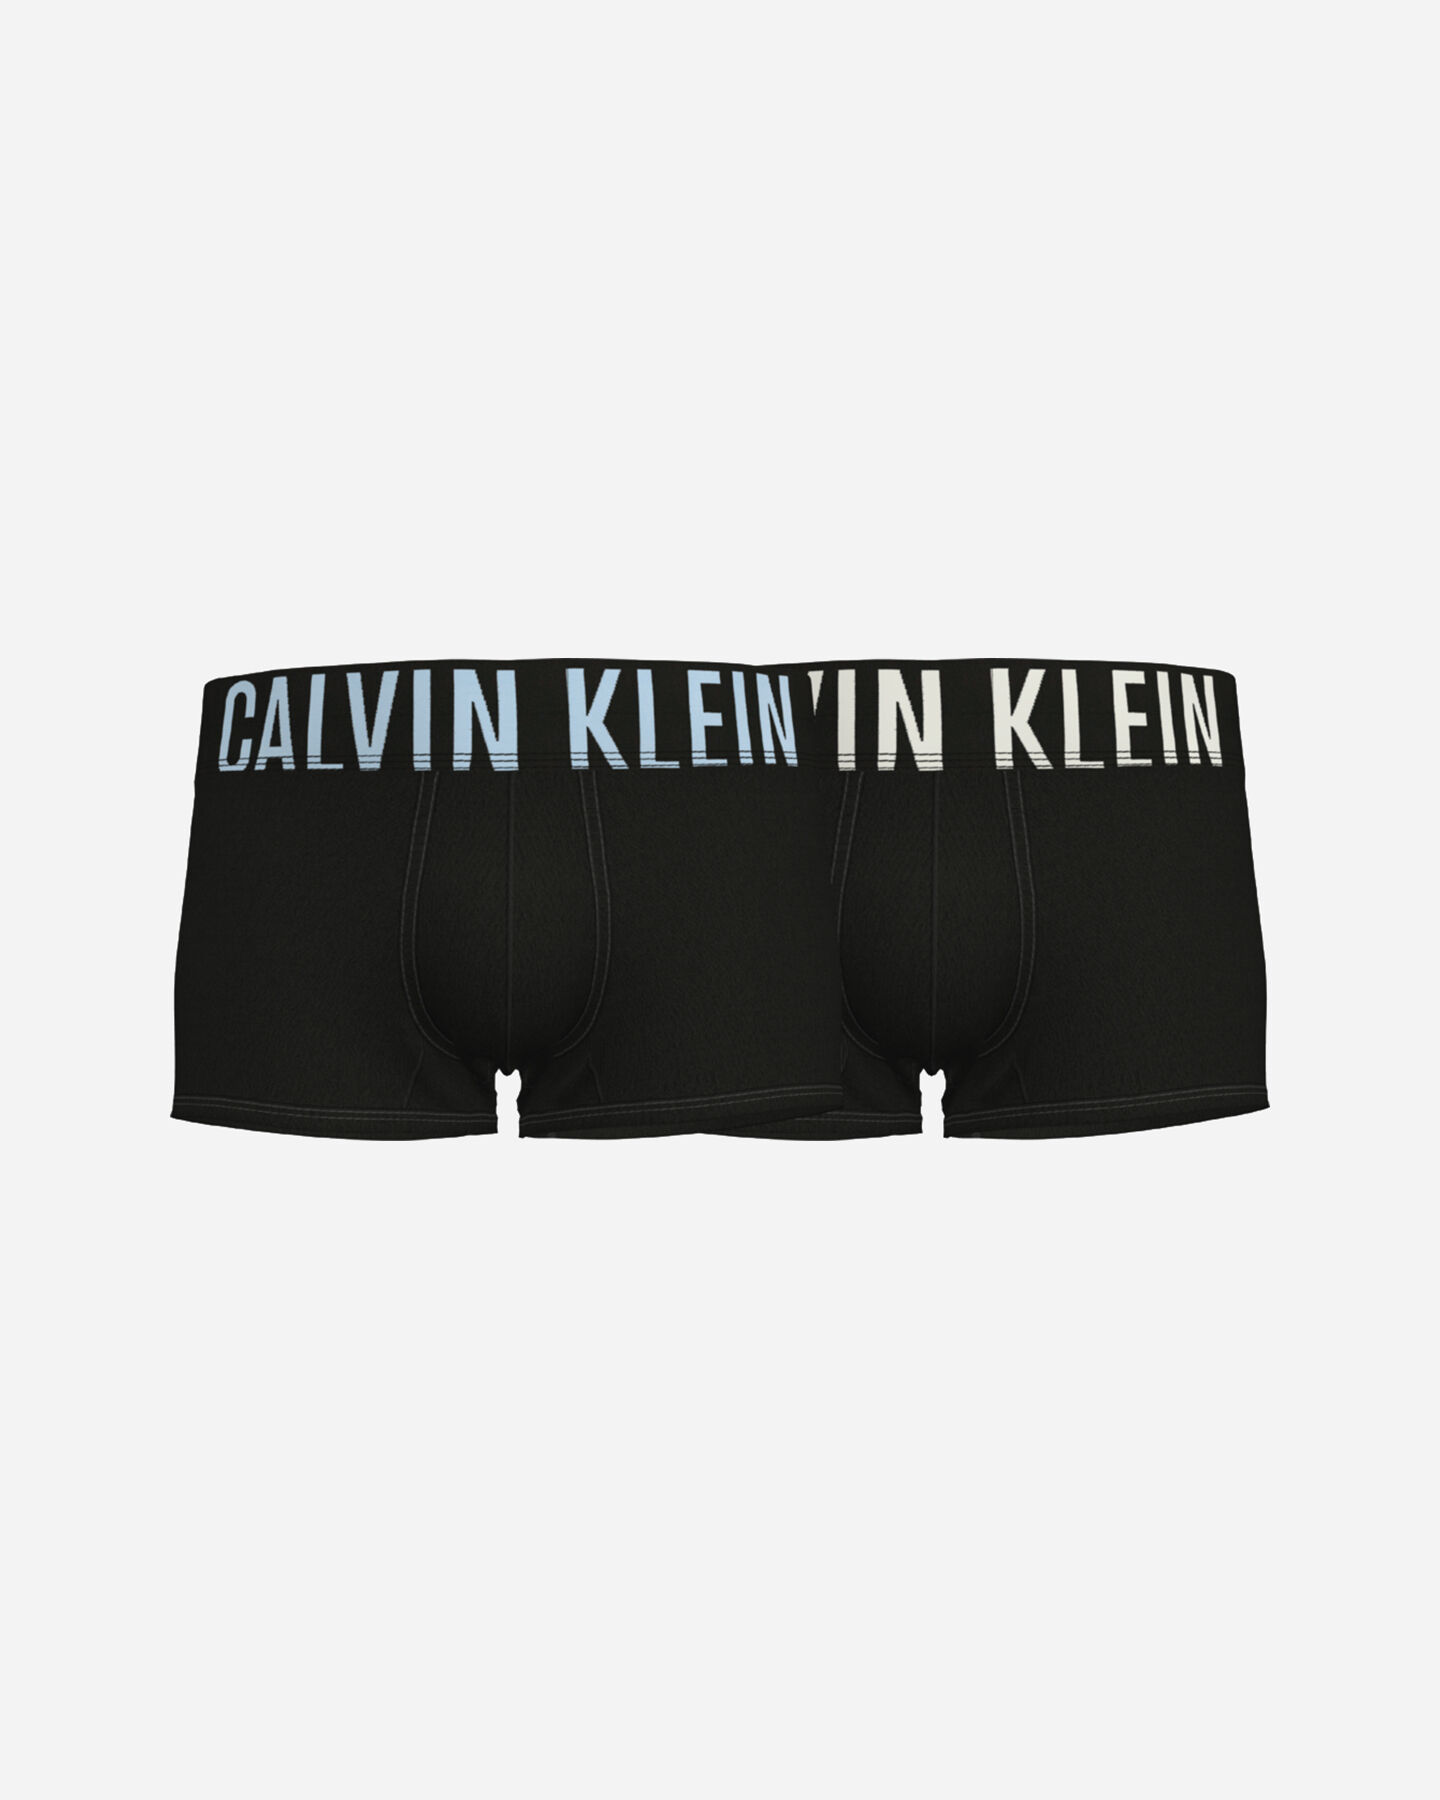  Intimo CALVIN KLEIN UNDERWEAR 2 PACK BOXER LOW RISE M S4109271|1QI|M scatto 0